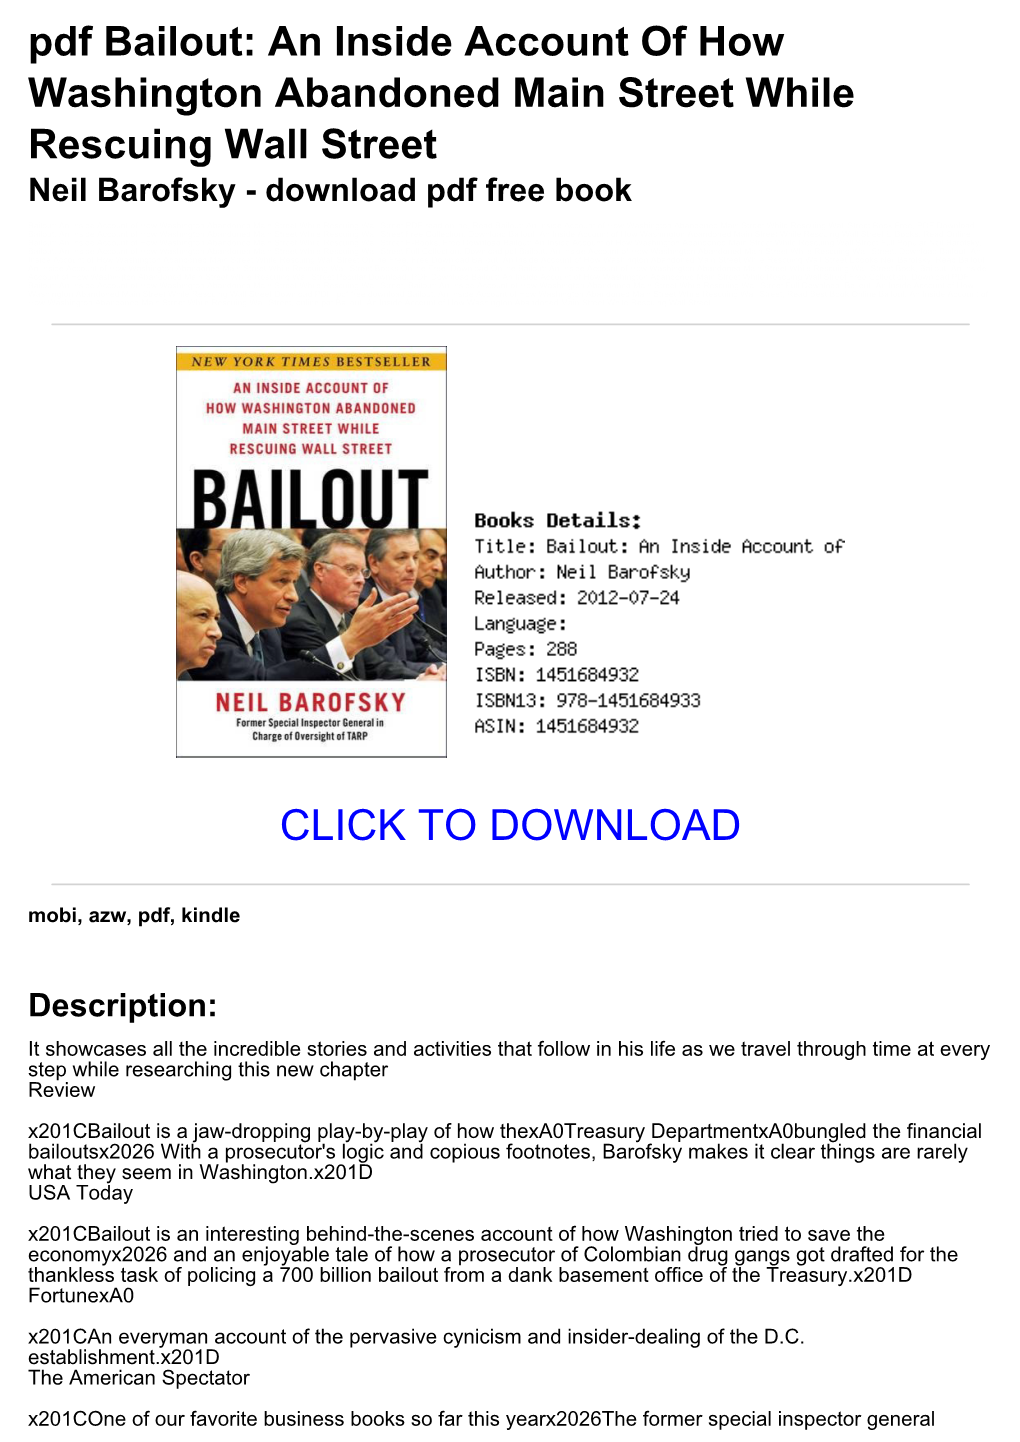 Pdf Bailout: an Inside Account of How Washington Abandoned Main Street While Rescuing Wall Street Neil Barofsky - Download Pdf Free Book